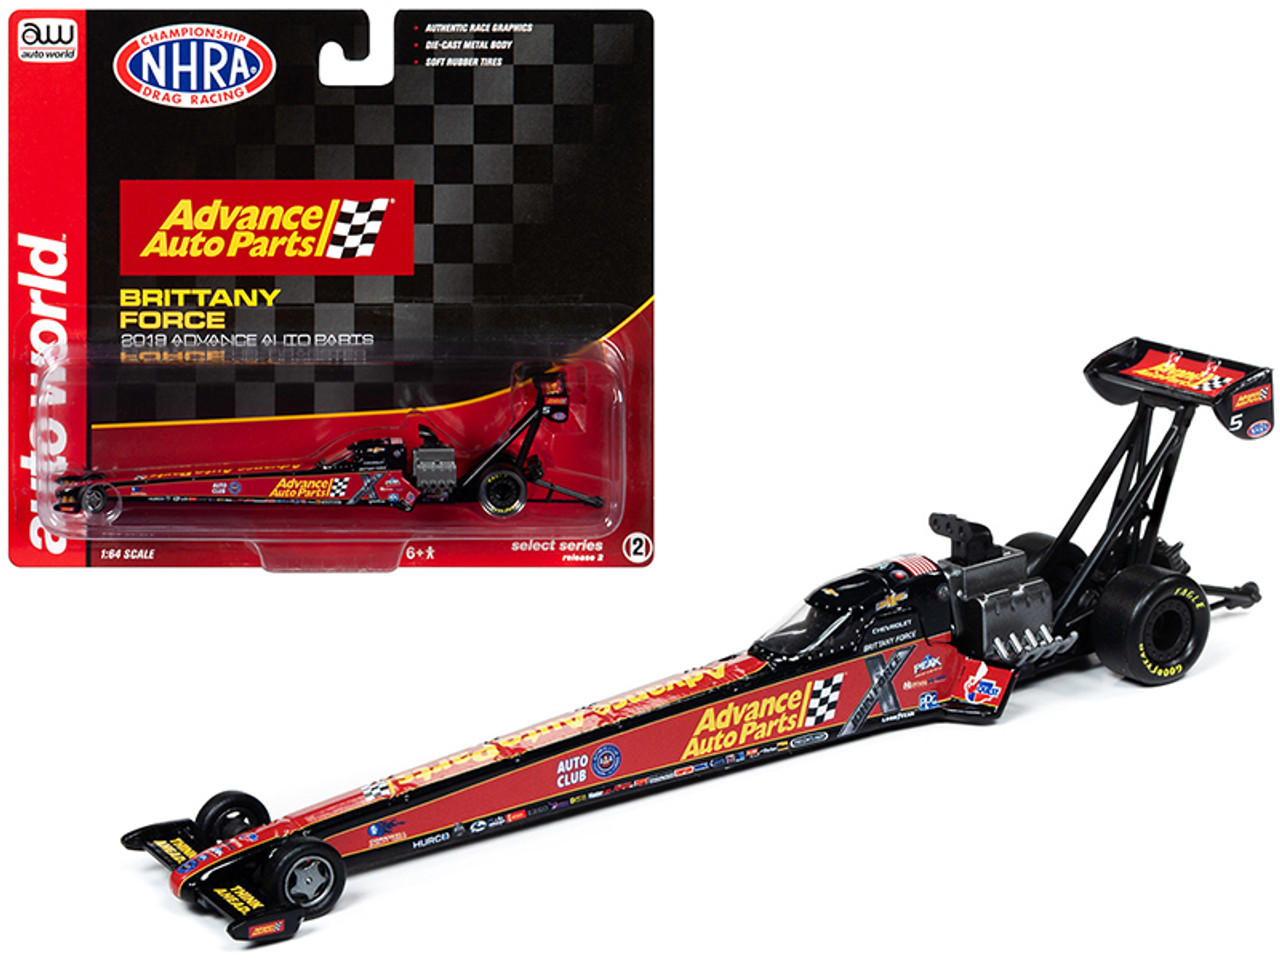 2019 NHRA TFD (Top Fuel Dragster) Brittany Force "Advance Auto Parts" 1/64 Diecast Model Car by Autoworld